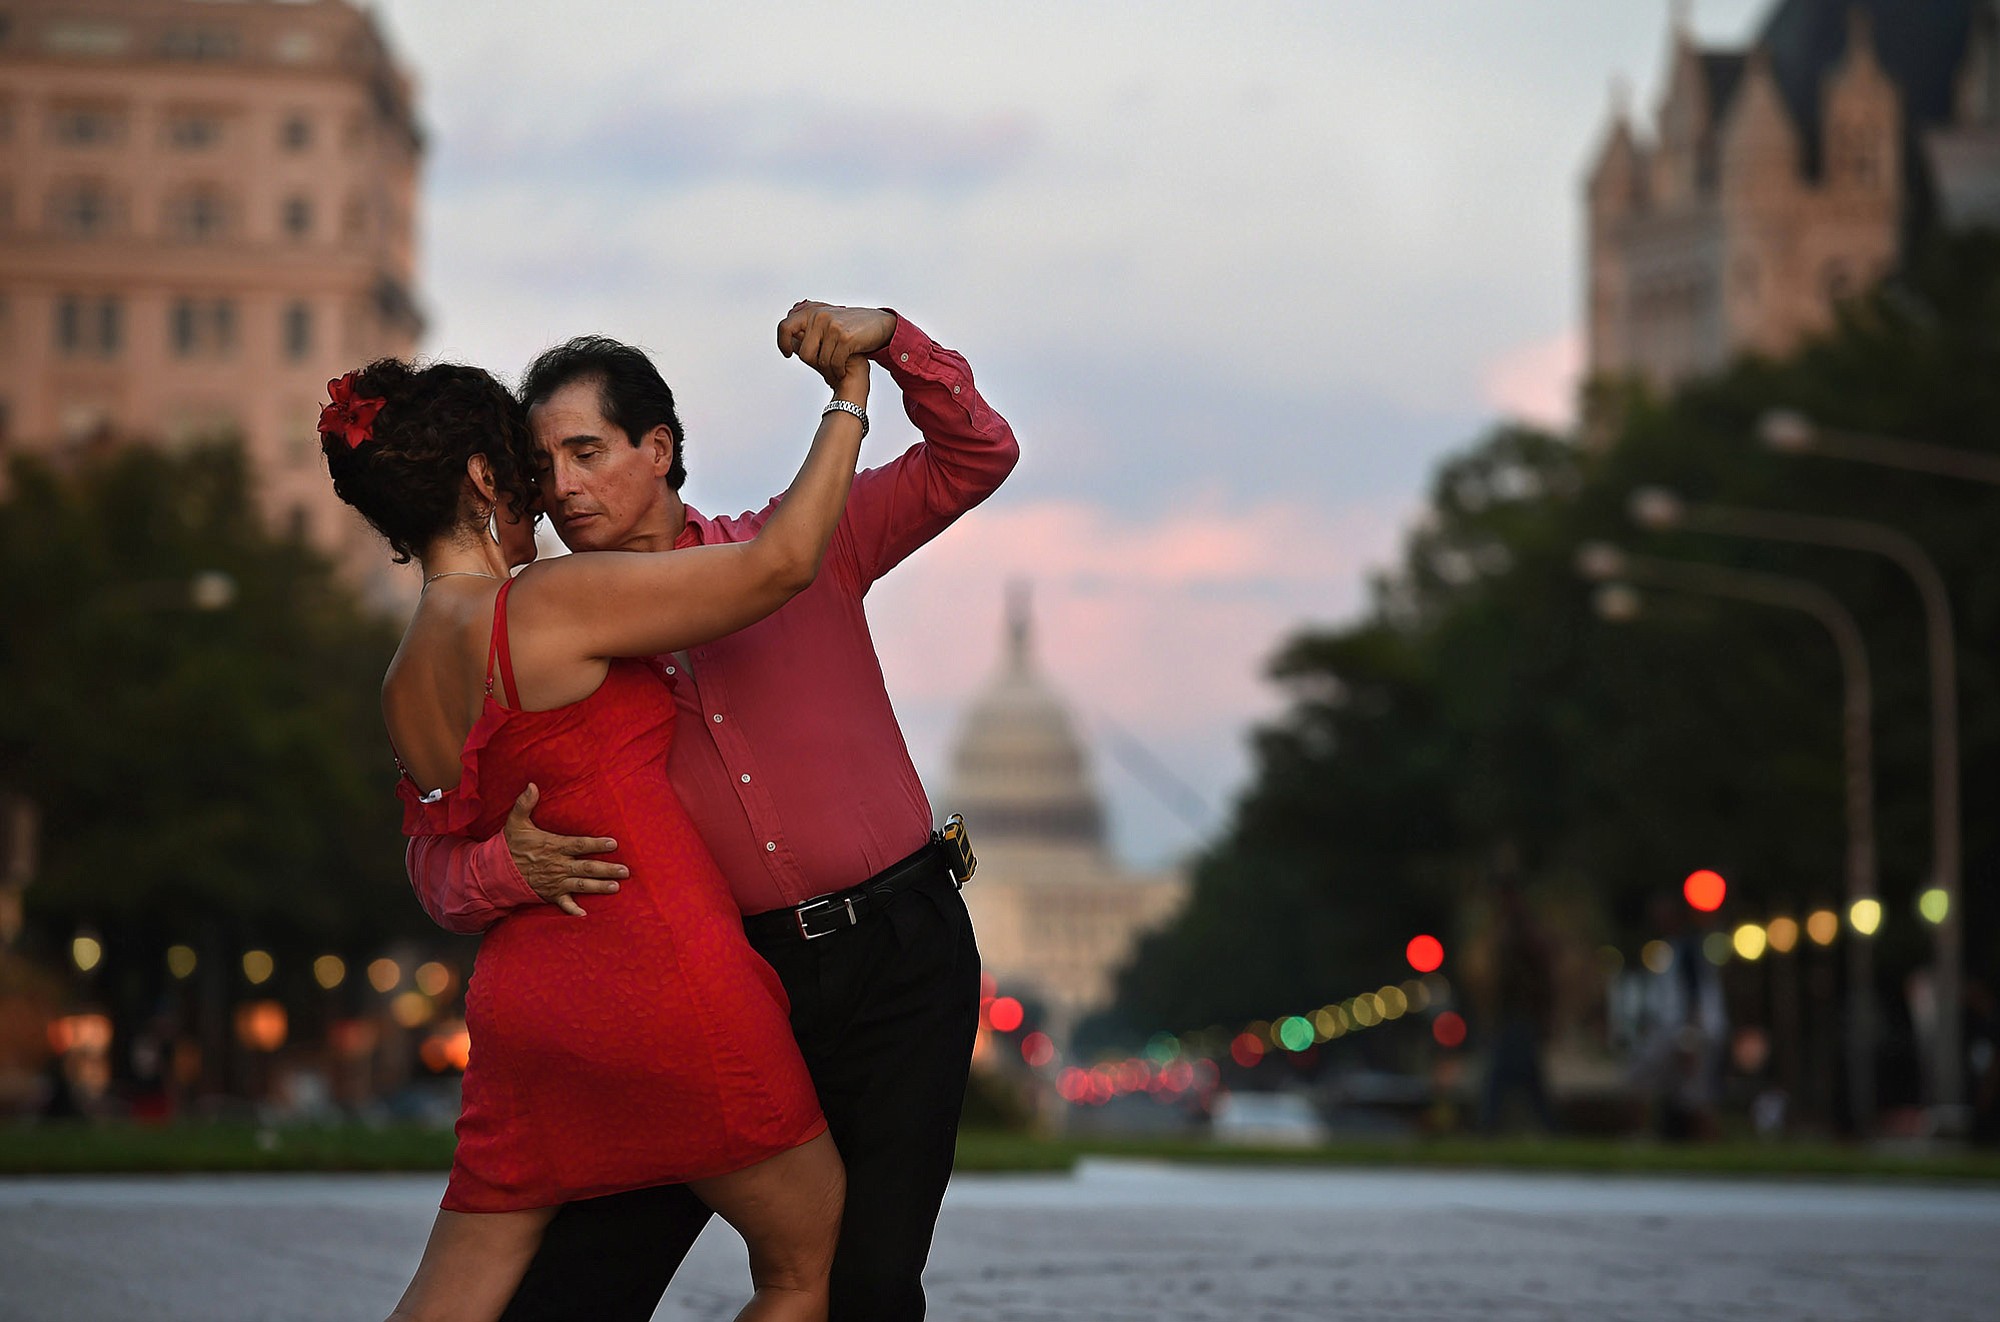 Mitra Fard dances with Carlos Gutierrez in a weekly tango dance at Freedom Plaza in Washington, D.C., late this summer; scientists have confirmed that the precise movements of the tango have therapeutic effects.